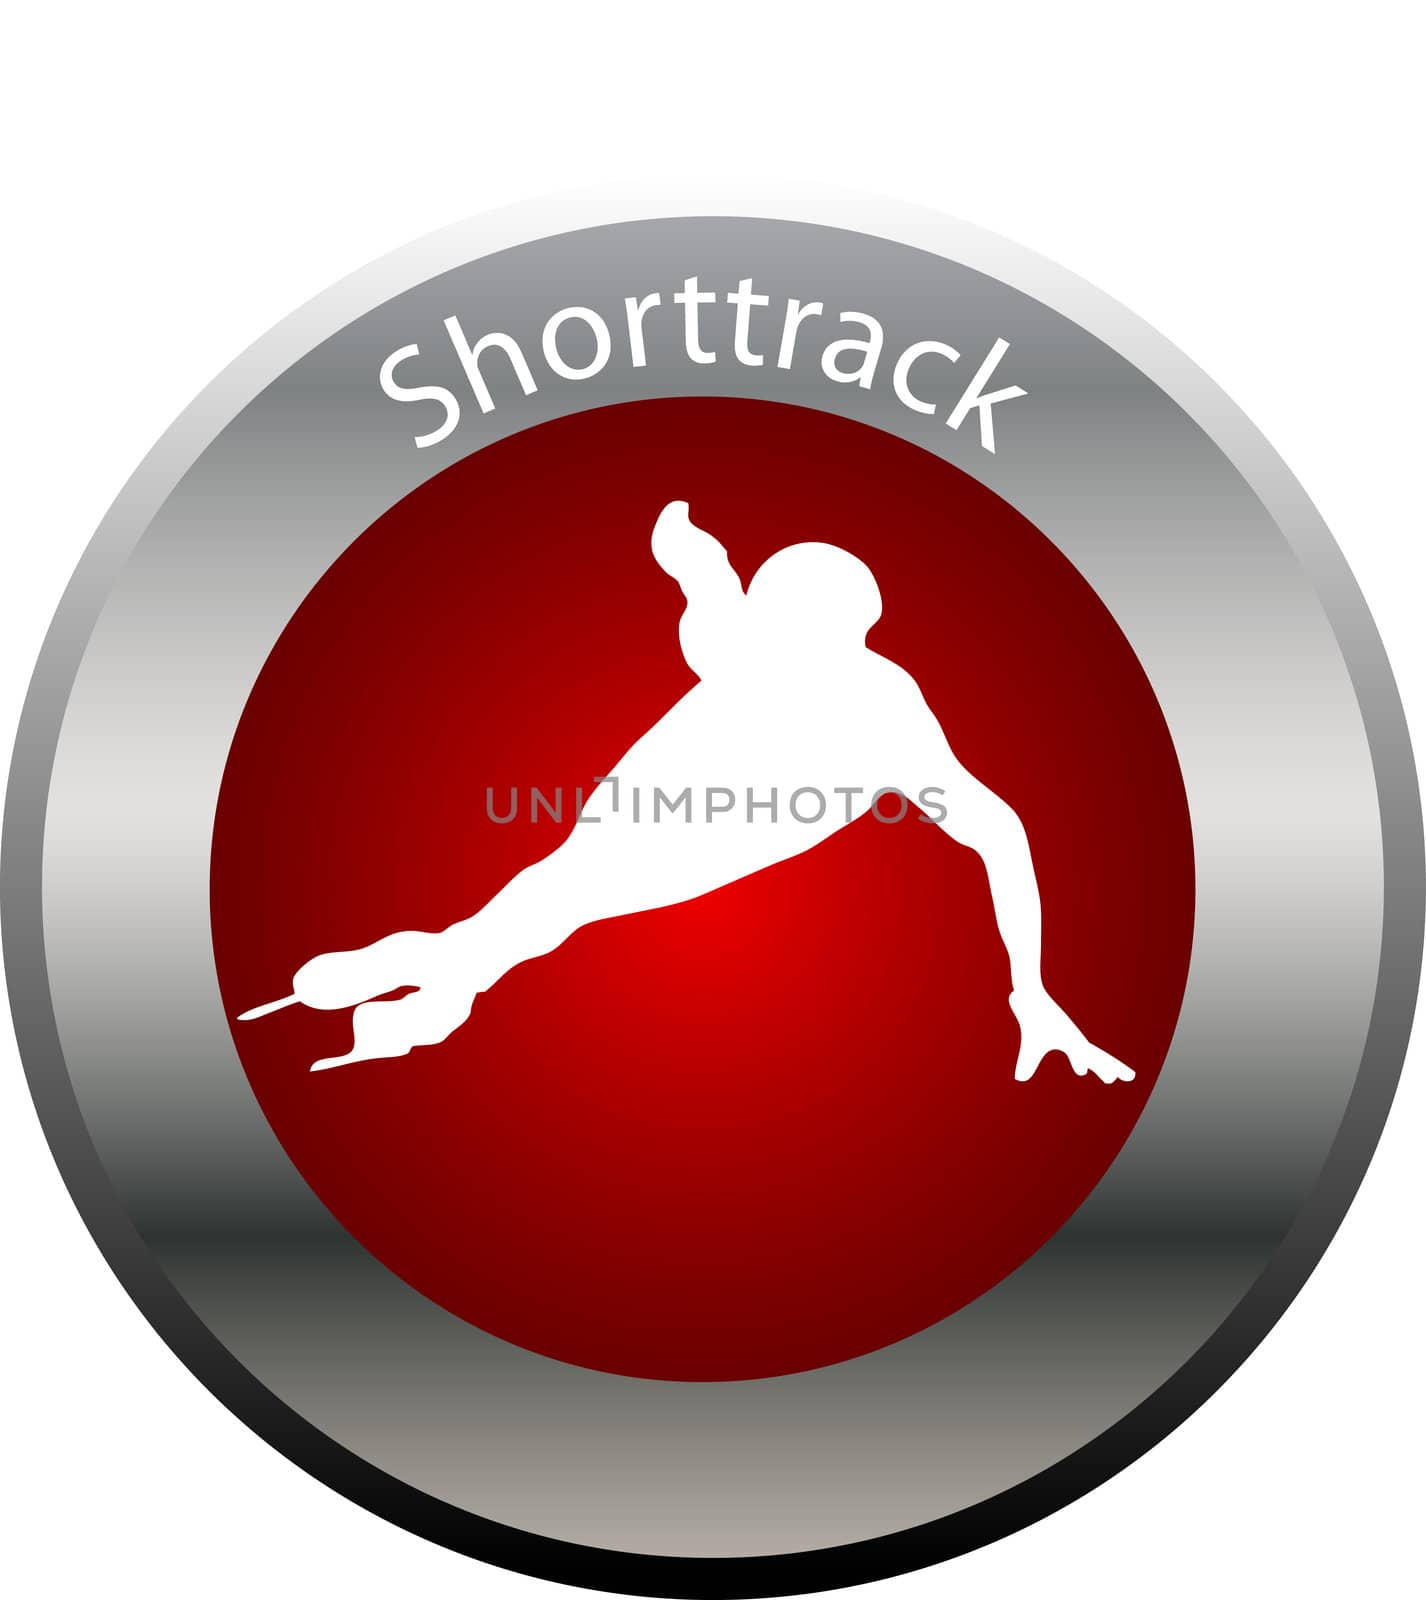 winter game button shorttrack by peromarketing